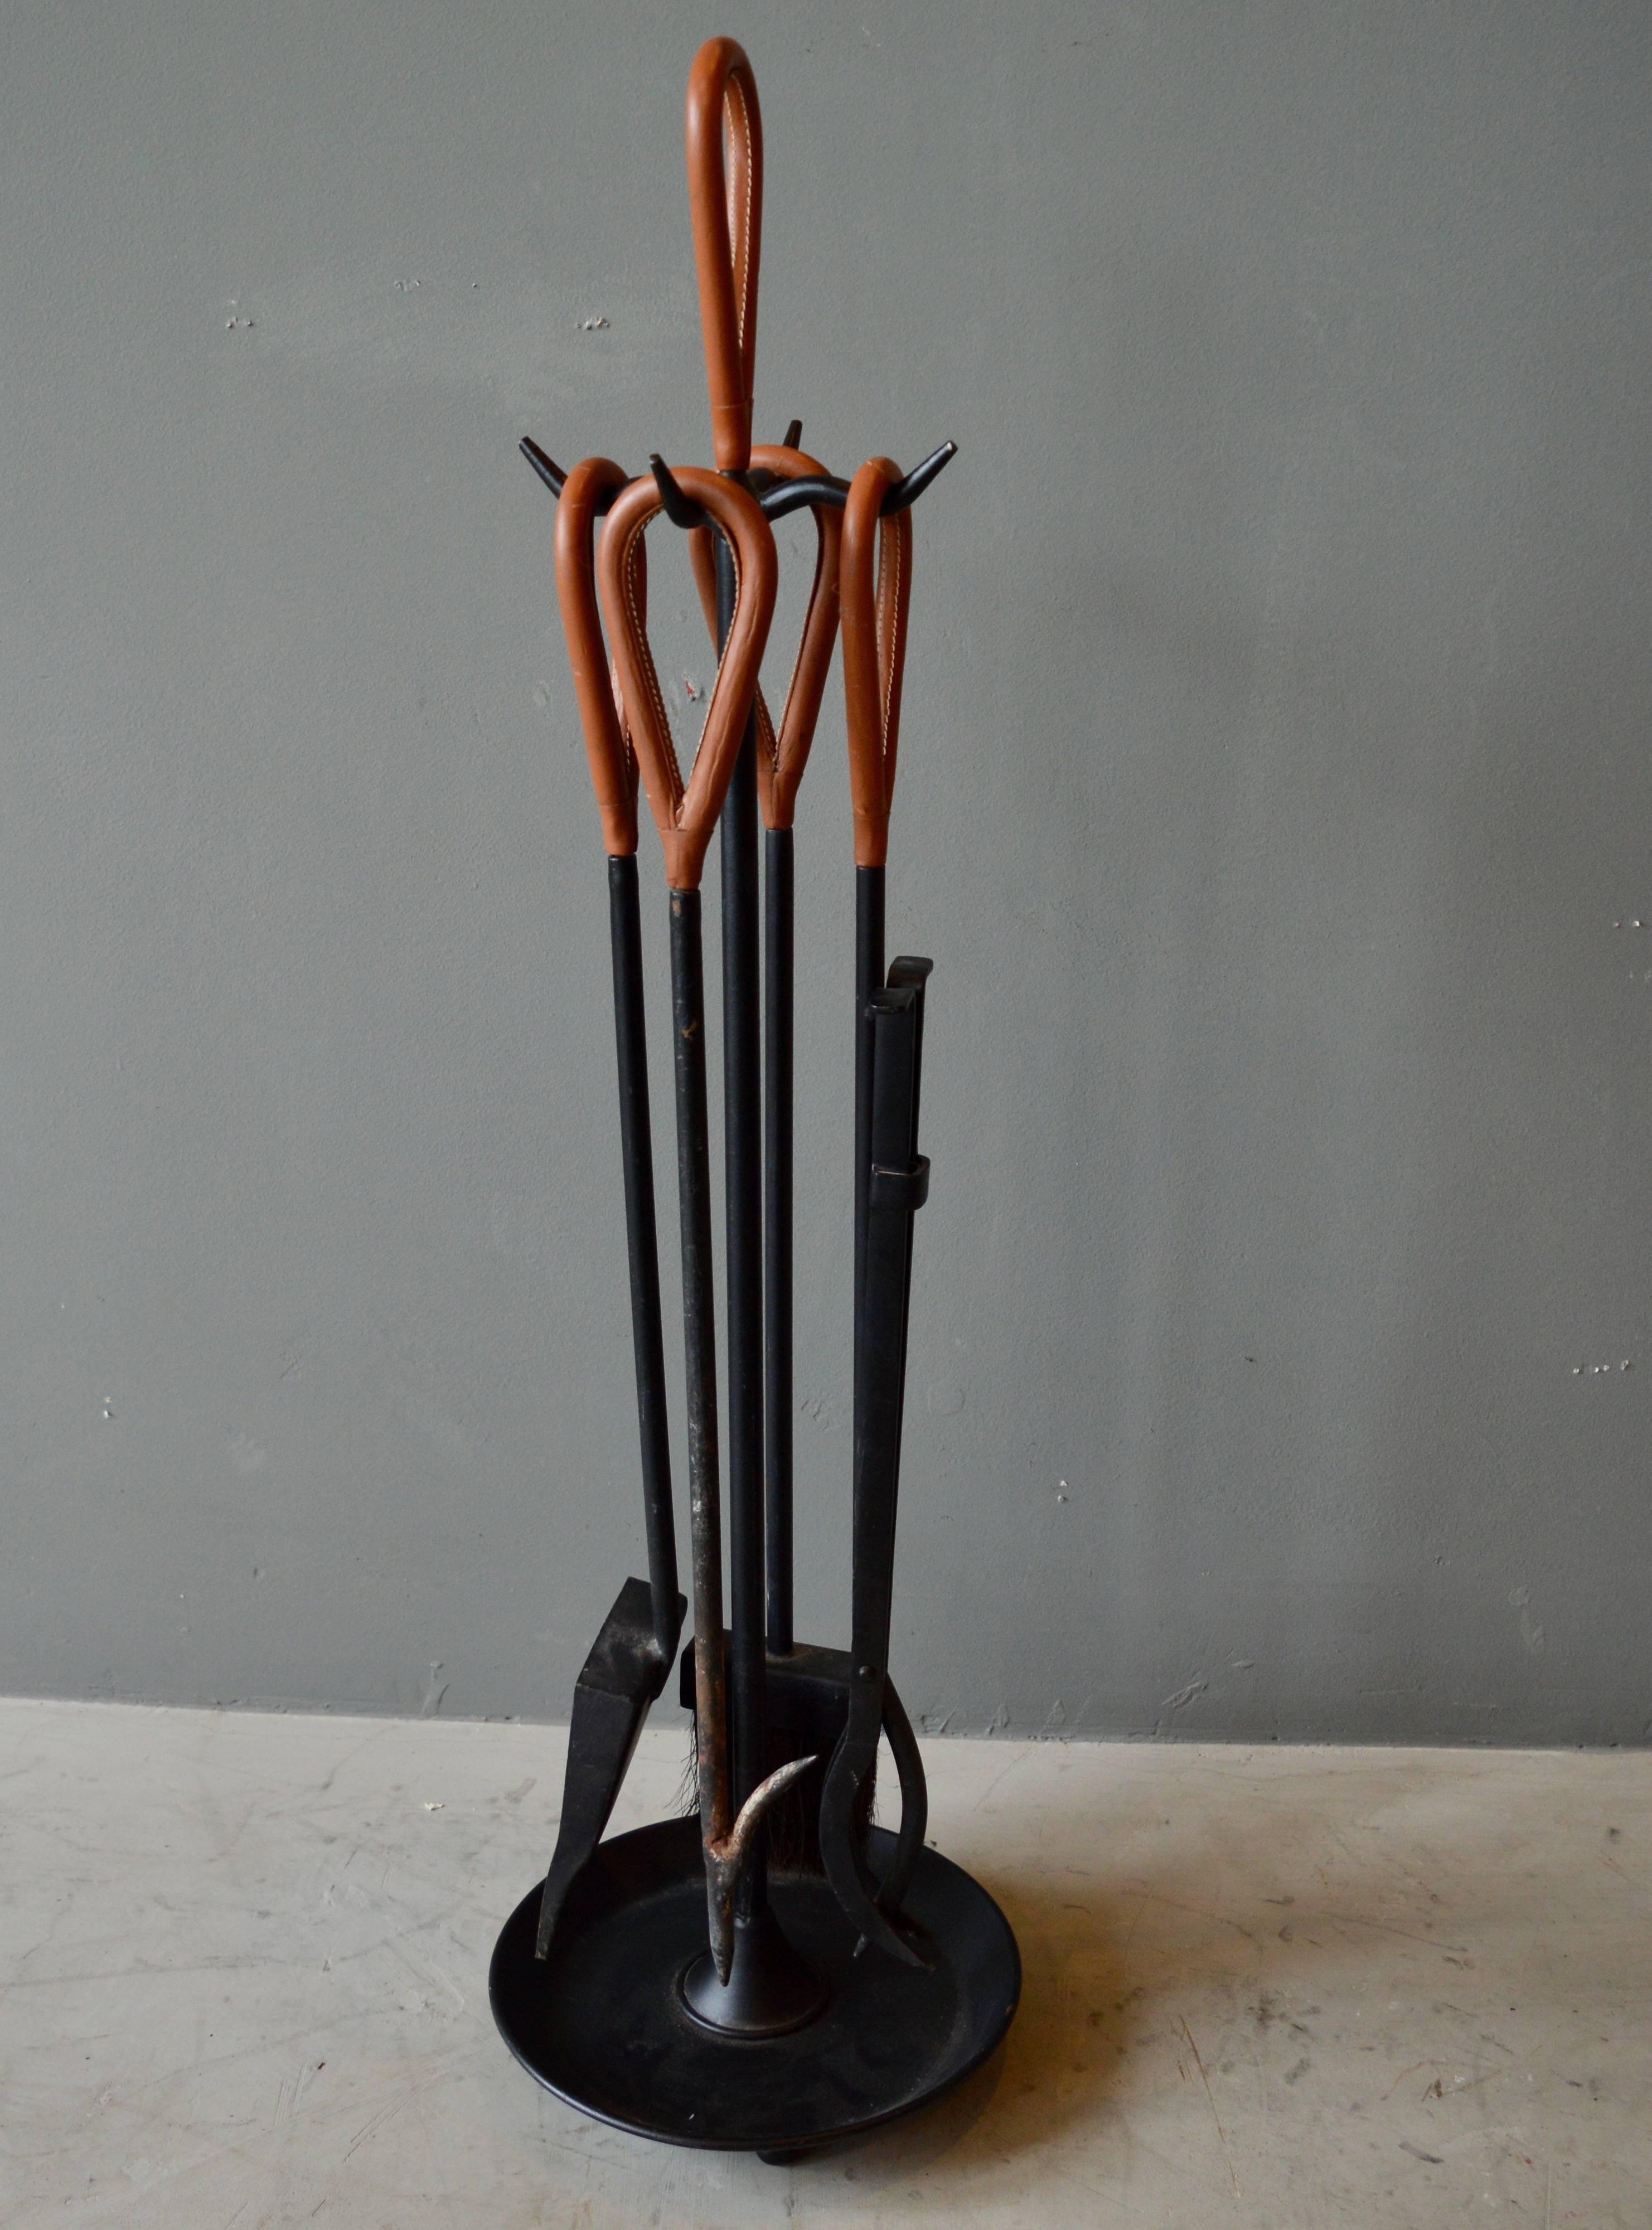 Gorgeous fireplace set in the style of Jacques Adnet. Iron frame with saddle leather wrapped handles. Fireplace set includes Stand along with four tools, broom, dustpan, tongs and fire poker. Very good vintage condition.